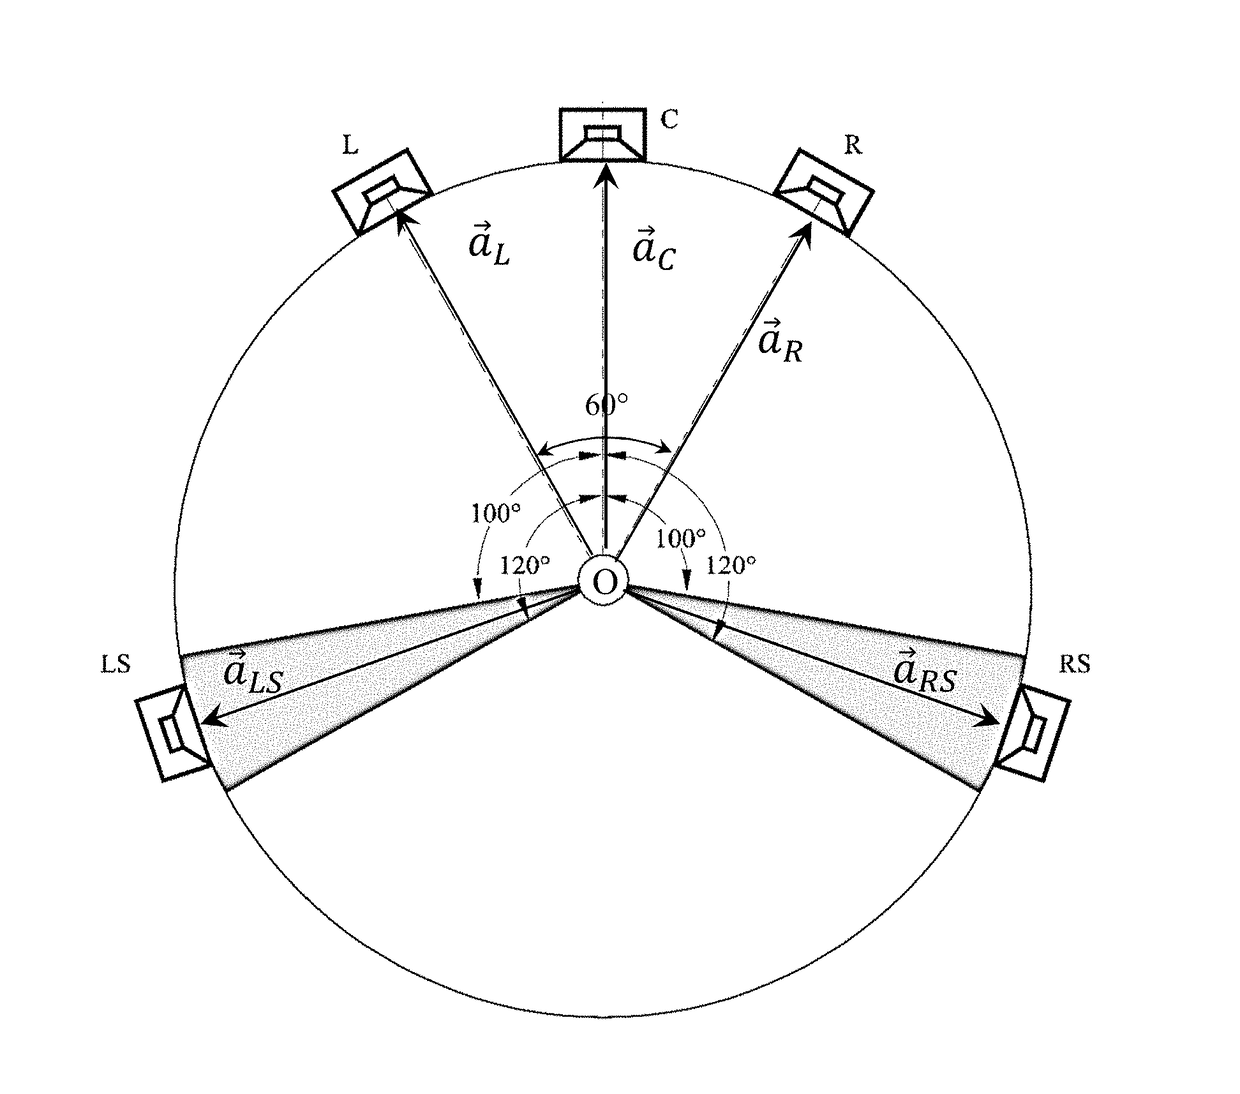 Method for Visualizing the Directional Sound Activity of a Multichannel Audio Signal